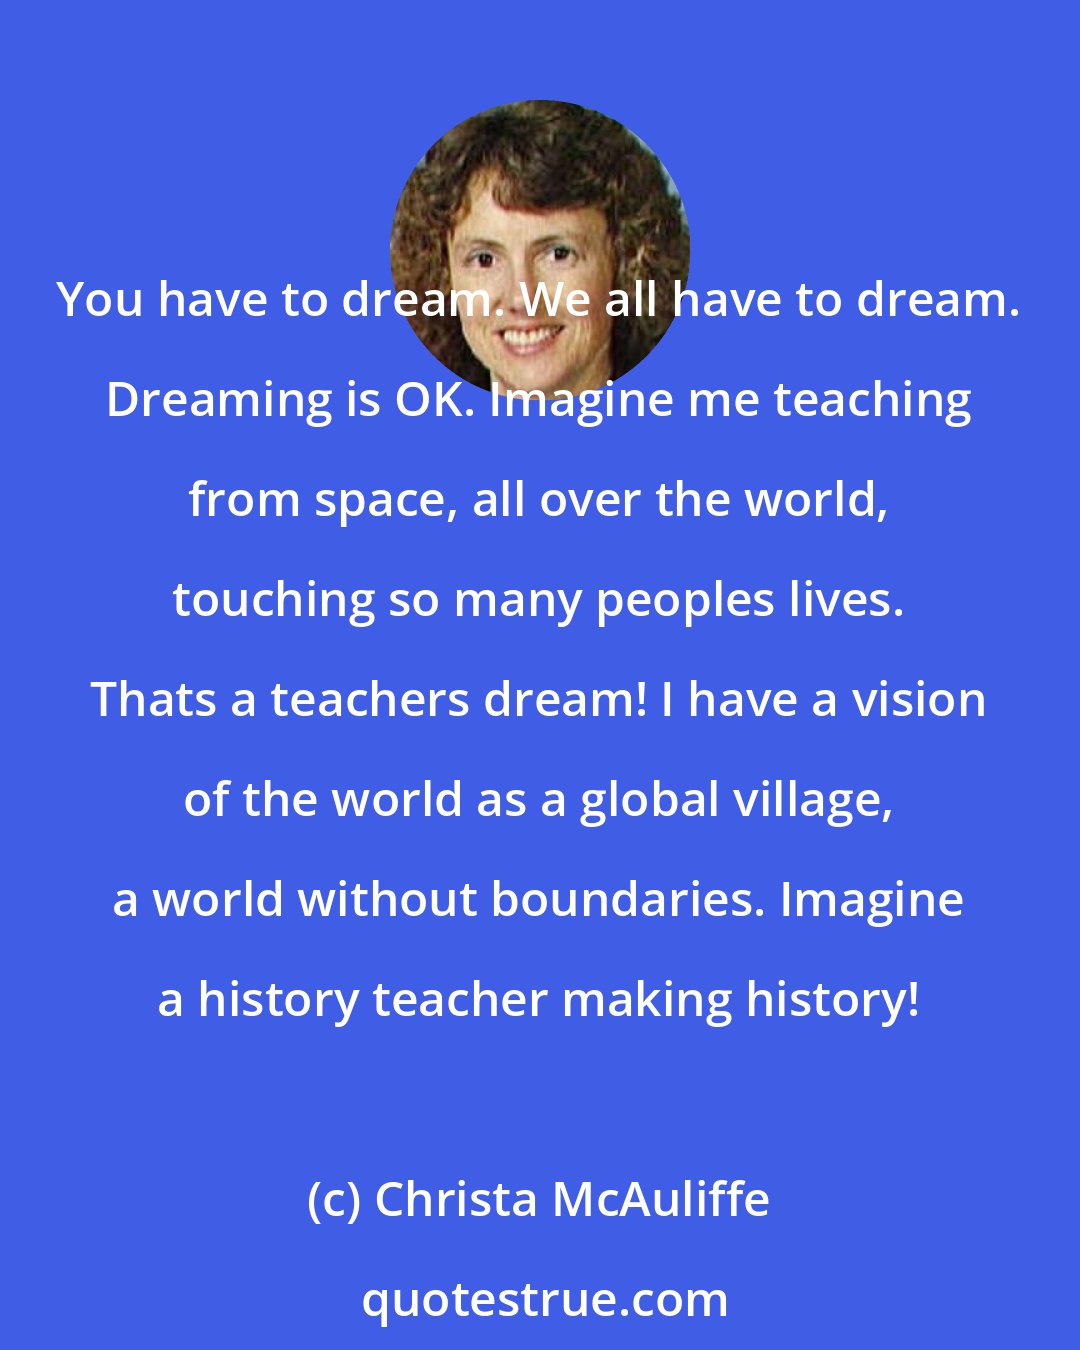 Christa McAuliffe: You have to dream. We all have to dream. Dreaming is OK. Imagine me teaching from space, all over the world, touching so many peoples lives. Thats a teachers dream! I have a vision of the world as a global village, a world without boundaries. Imagine a history teacher making history!